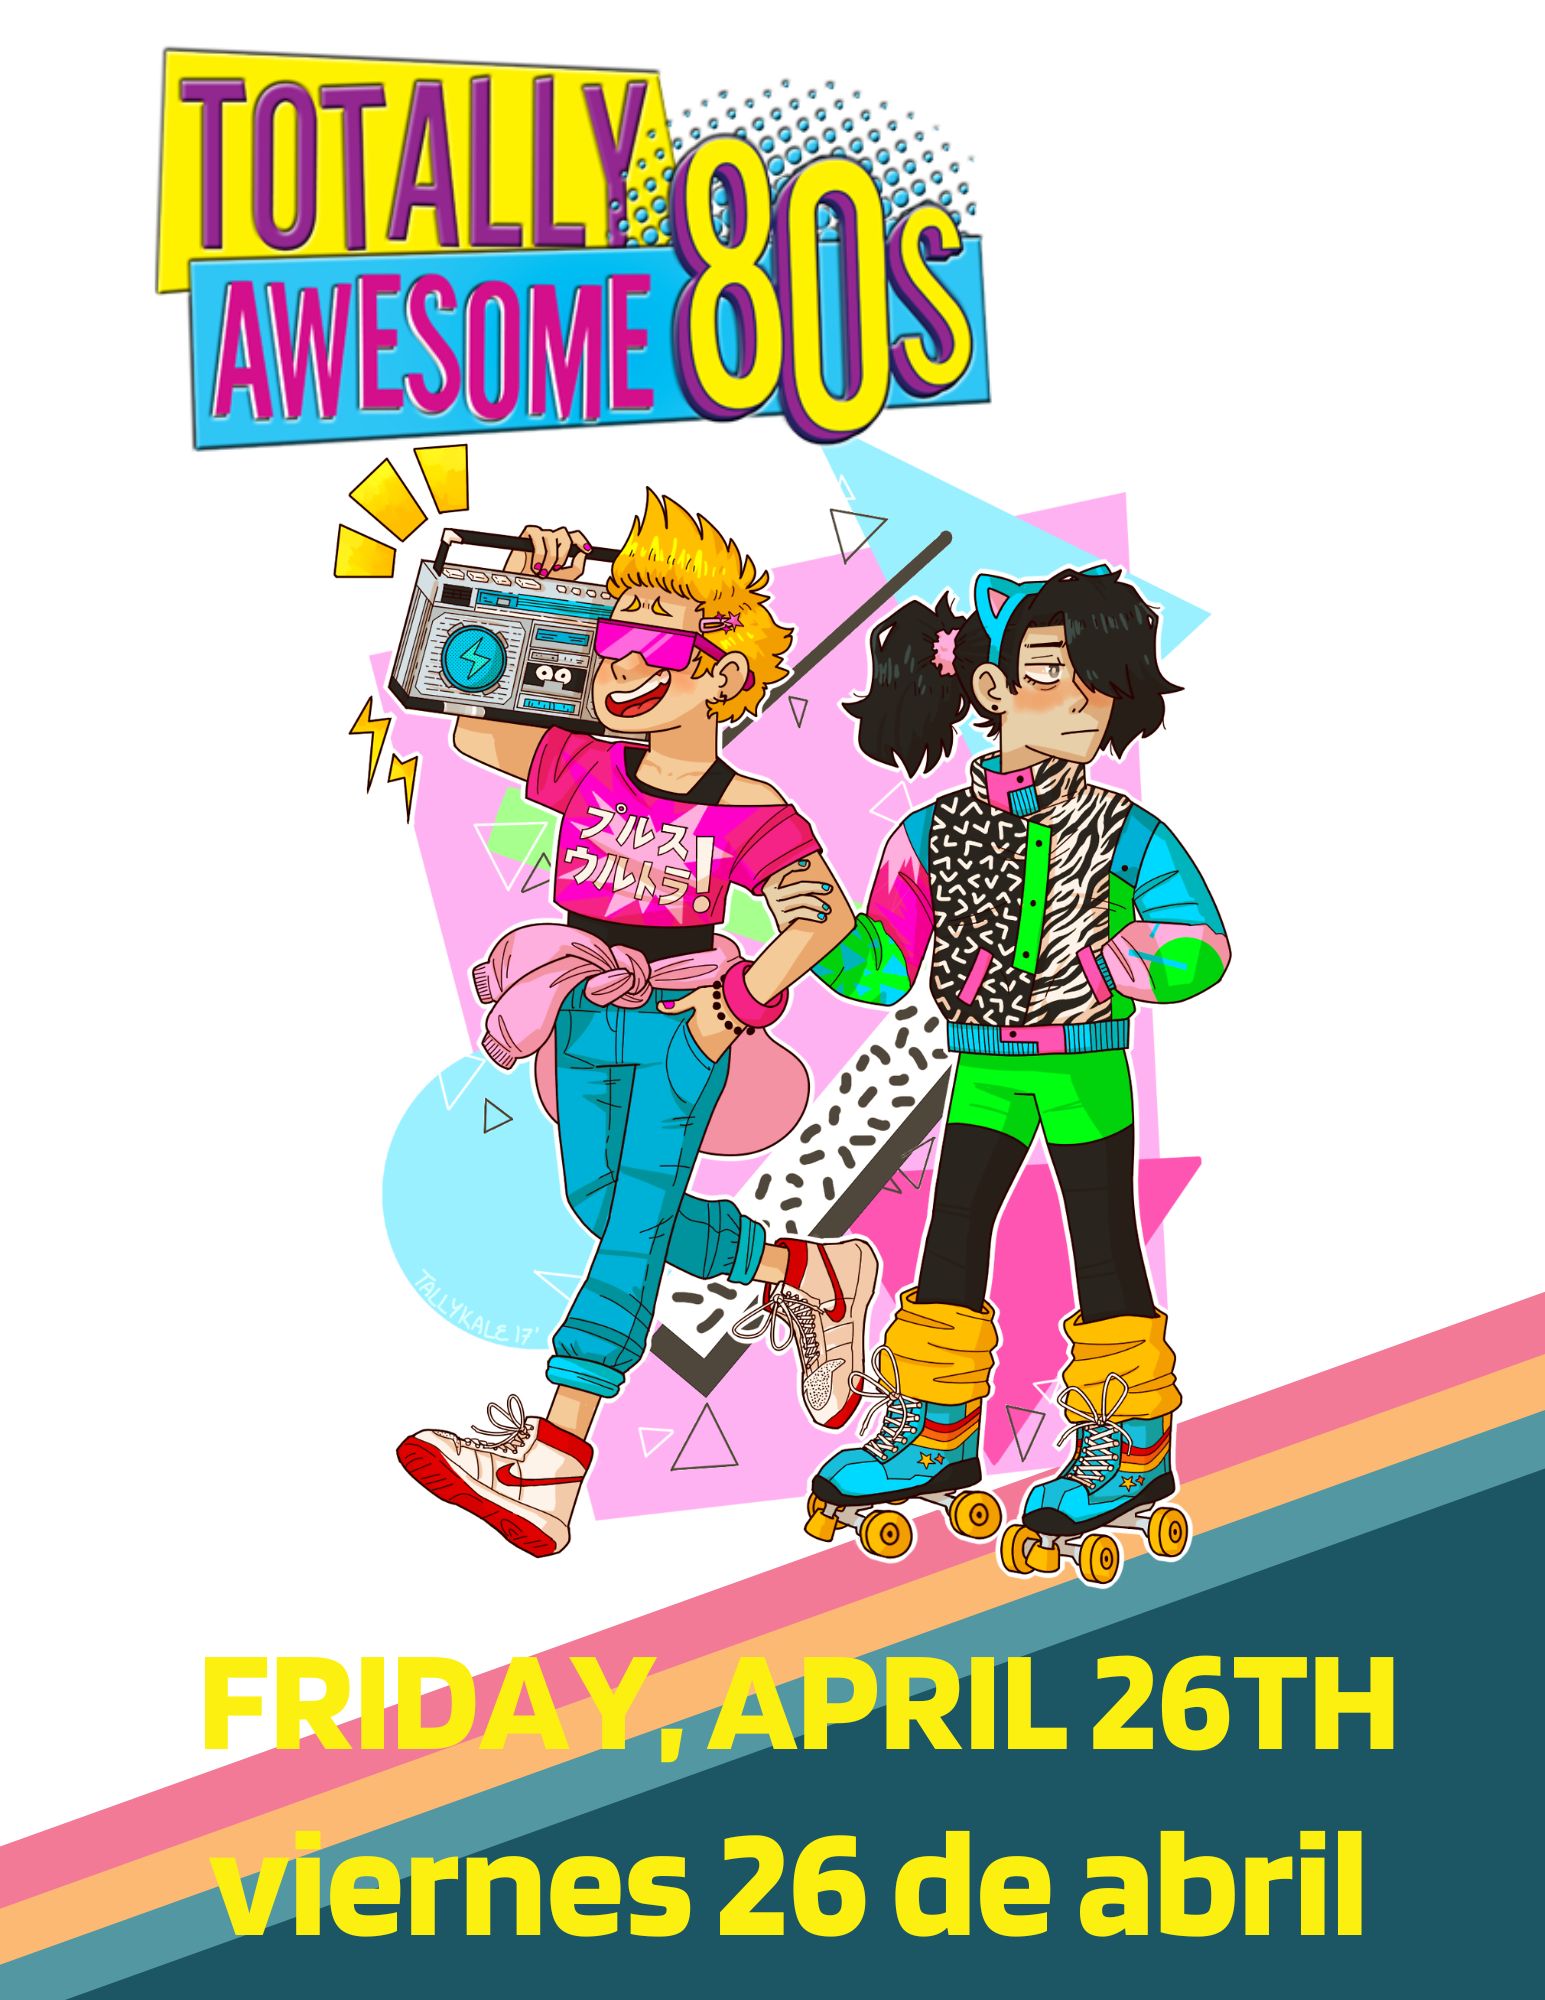 Flyer announcing 80's Spirit Day for April 26th.